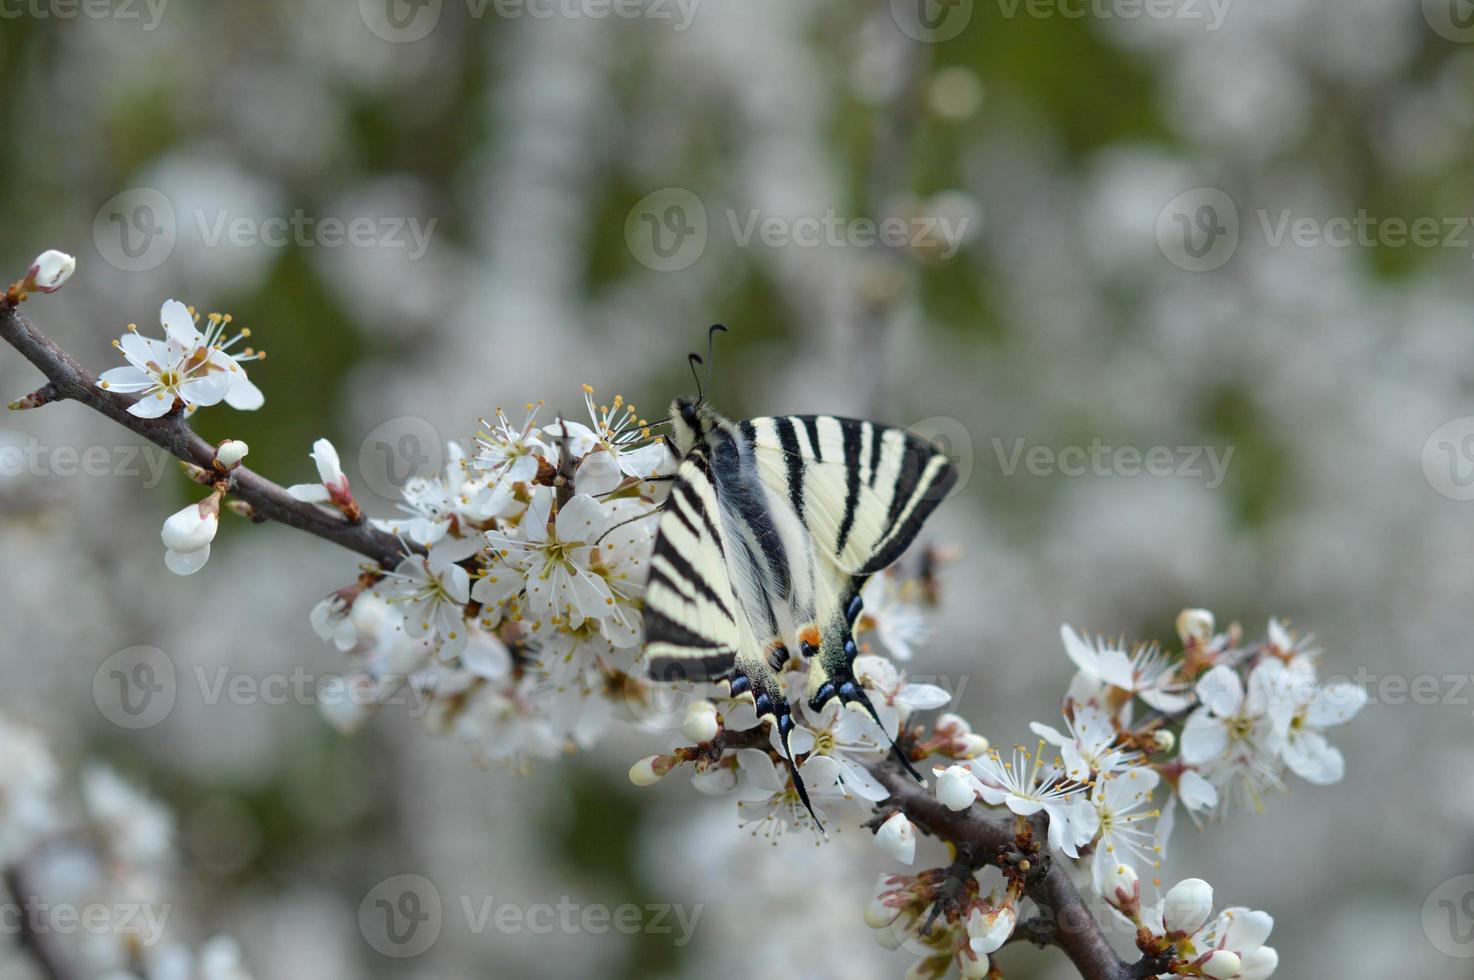 Scarce swallowtail butterfly on a blooming tree branch photo